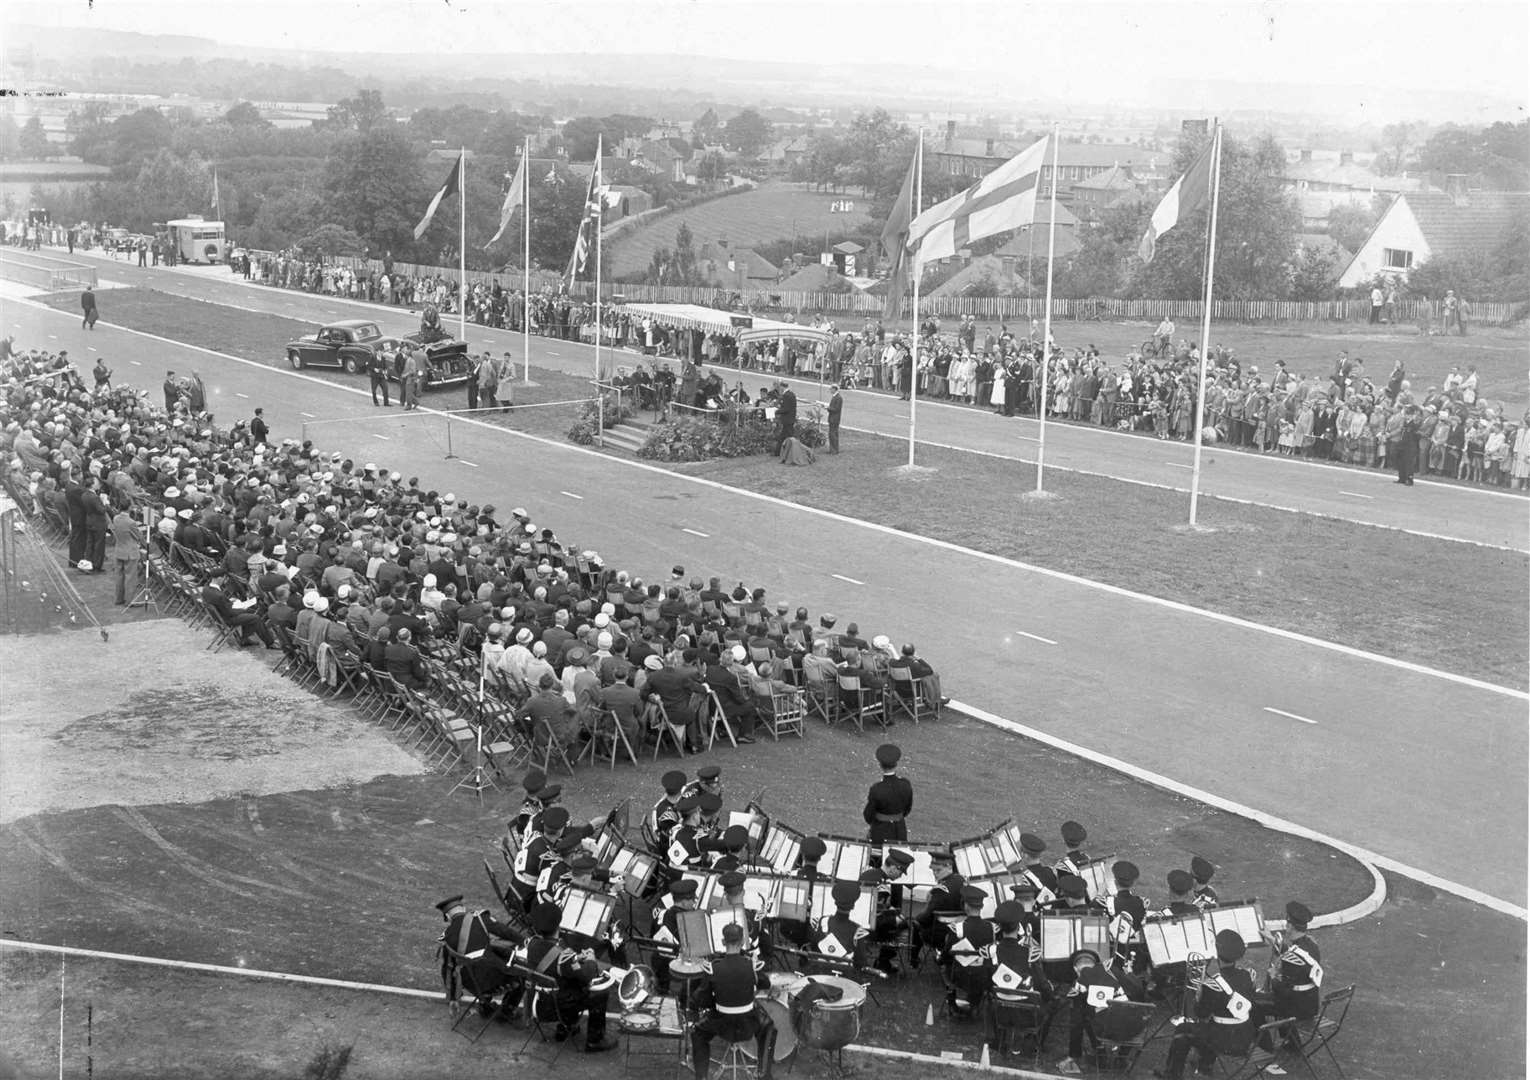 The official opening of Ashford bypass was recorded with great pomp and ceremony in July 1957